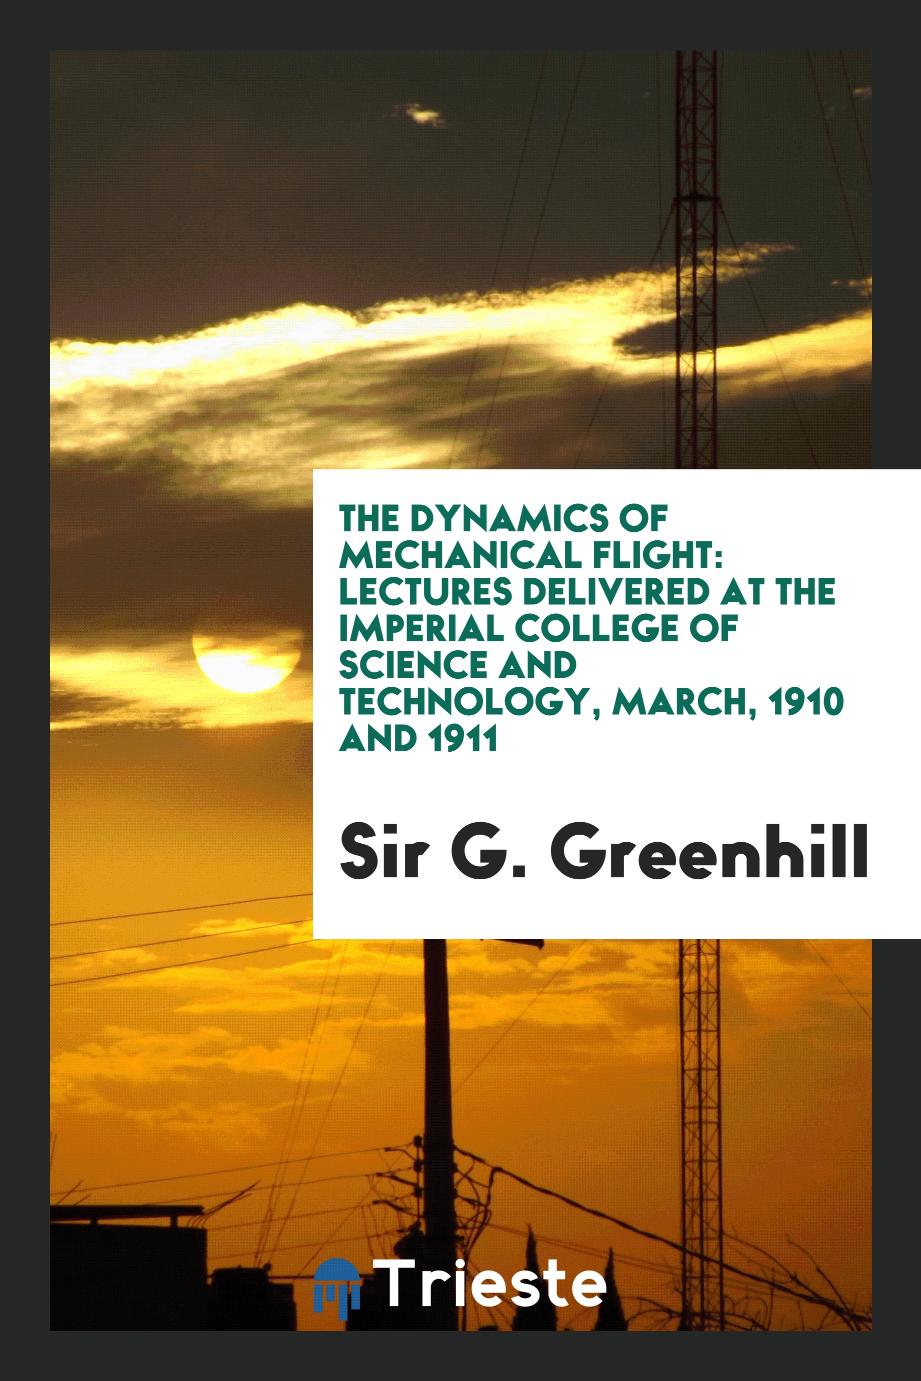 The Dynamics of Mechanical Flight: Lectures Delivered at the Imperial College of Science and Technology, March, 1910 and 1911